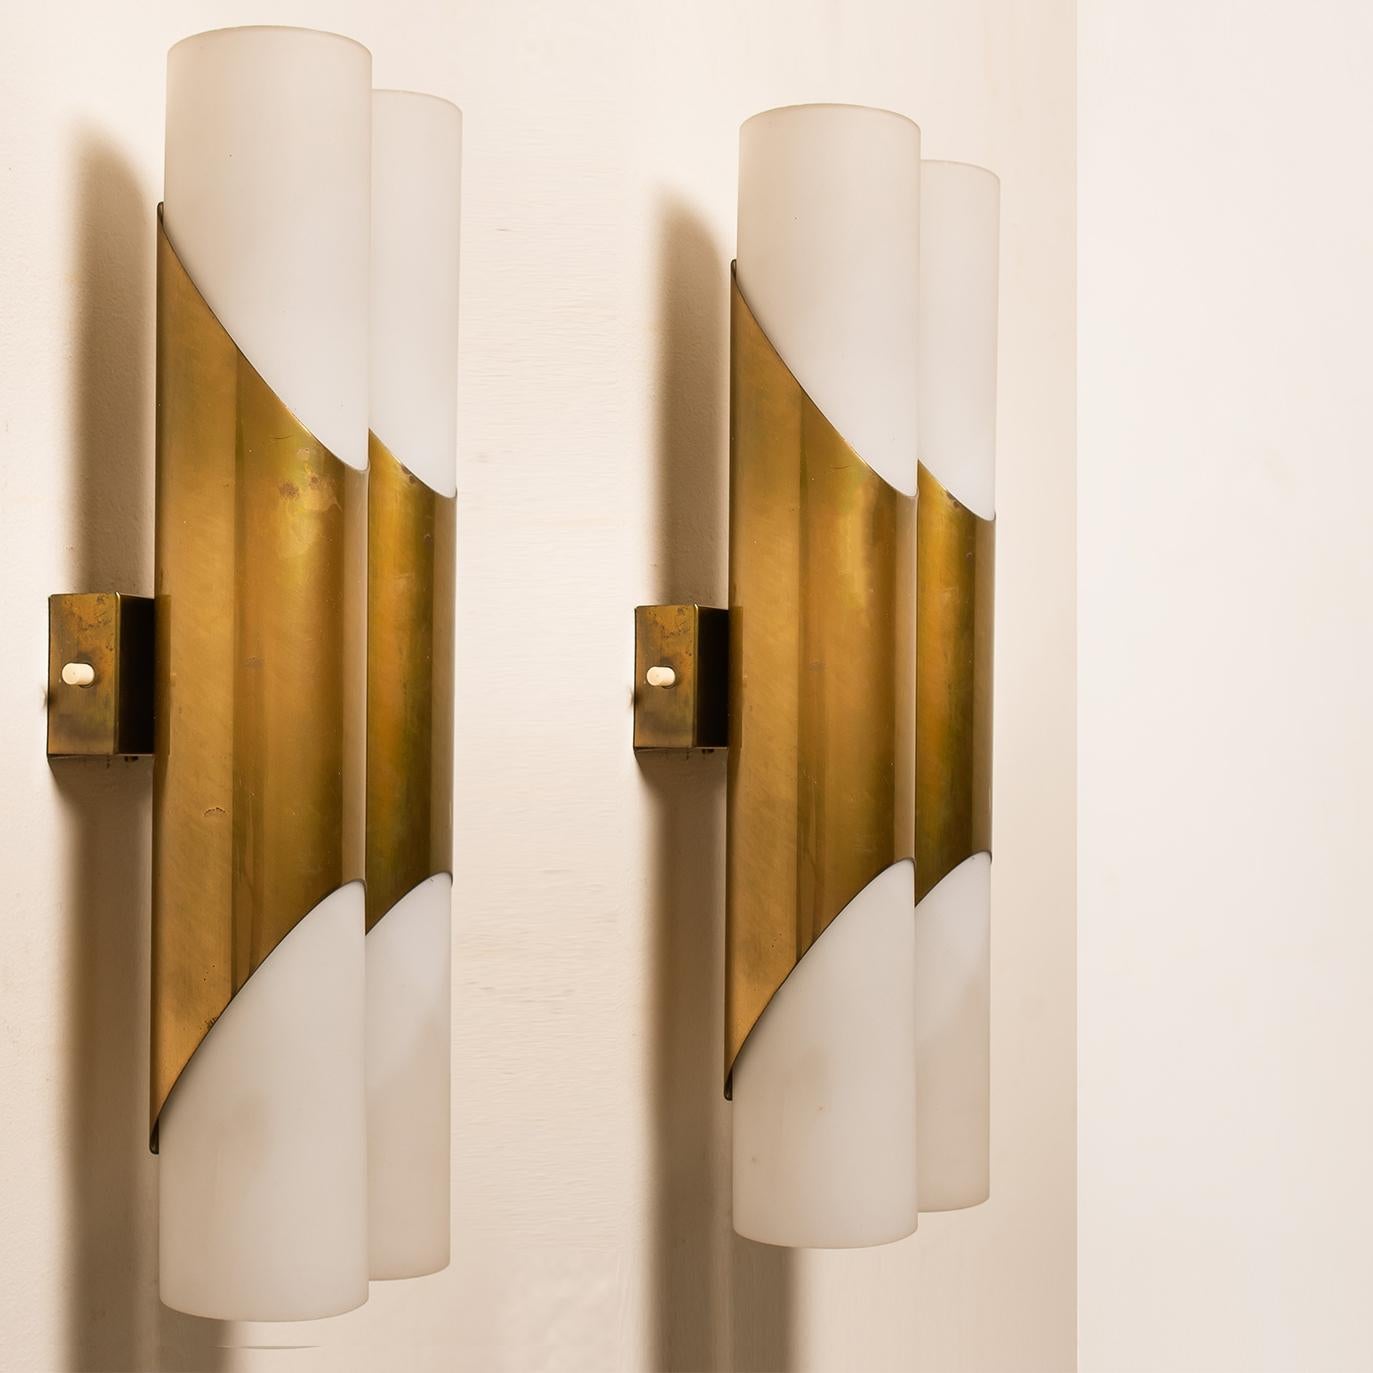 Mid-Century Modern Pair of Wall Sconces or Wall Lights in the Style of RAAK, Amsterdam, 1970